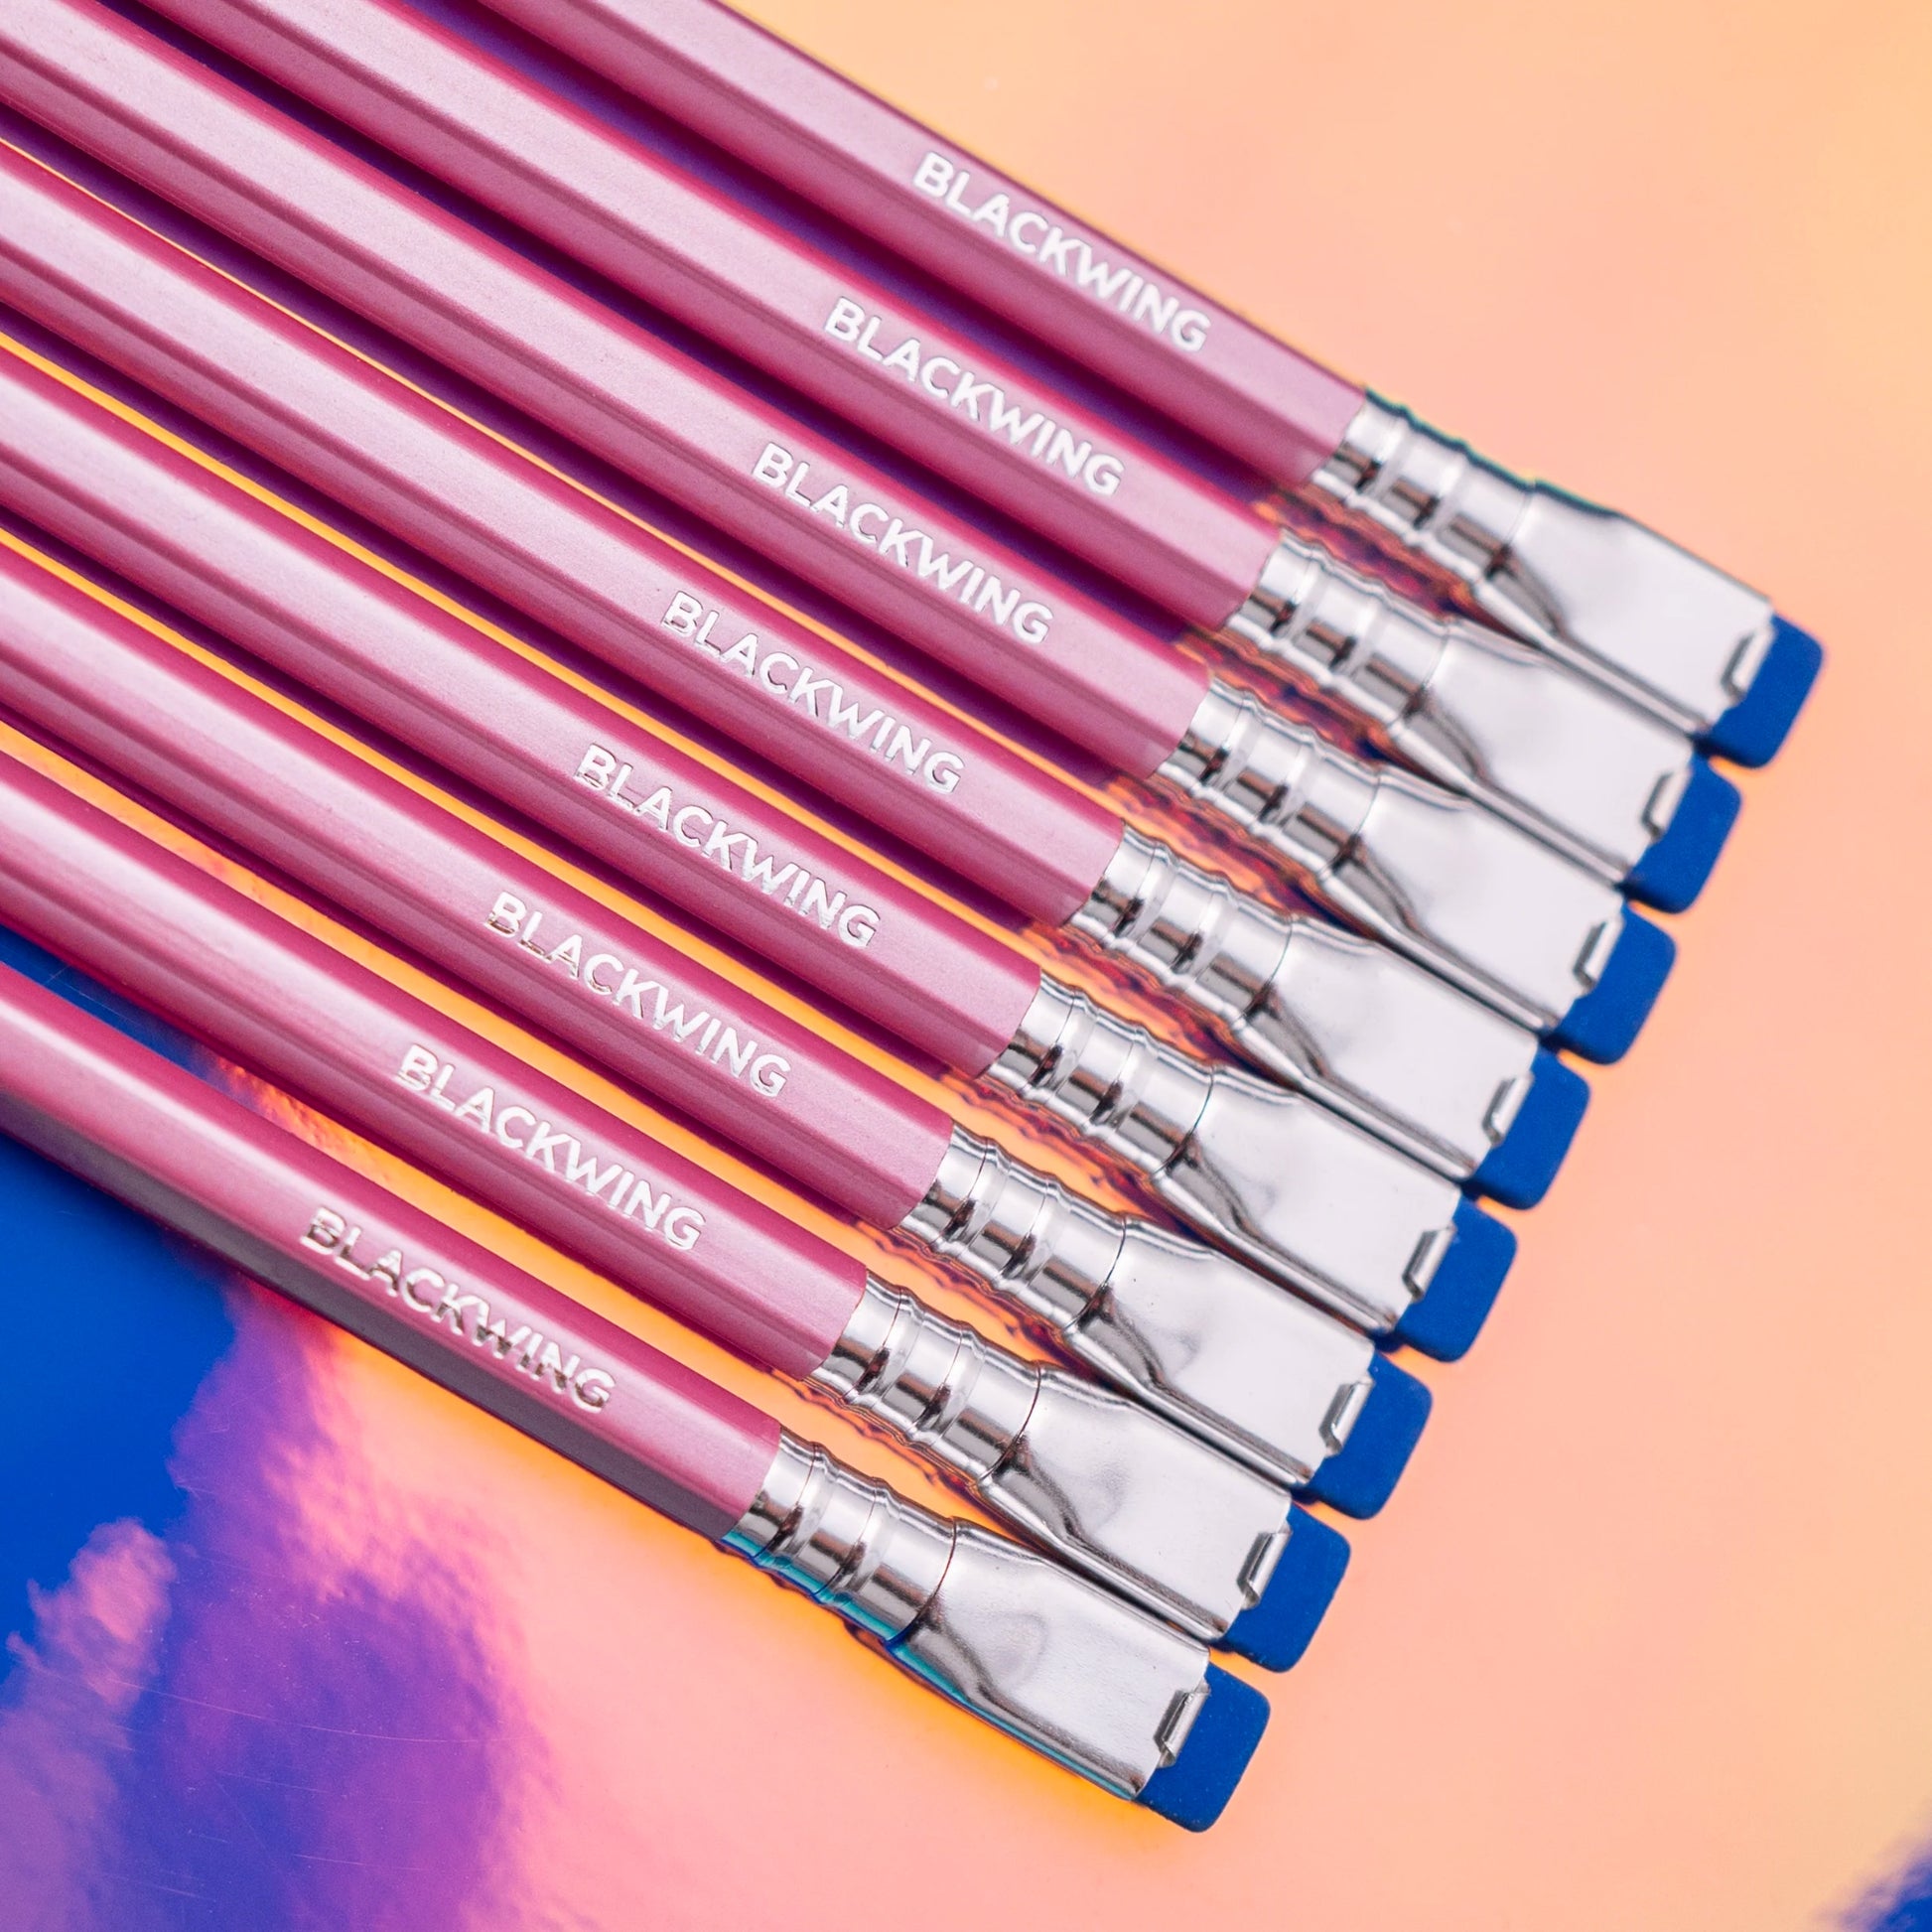 Blackwing Pearlescent Pencil - Pink - Set of 12